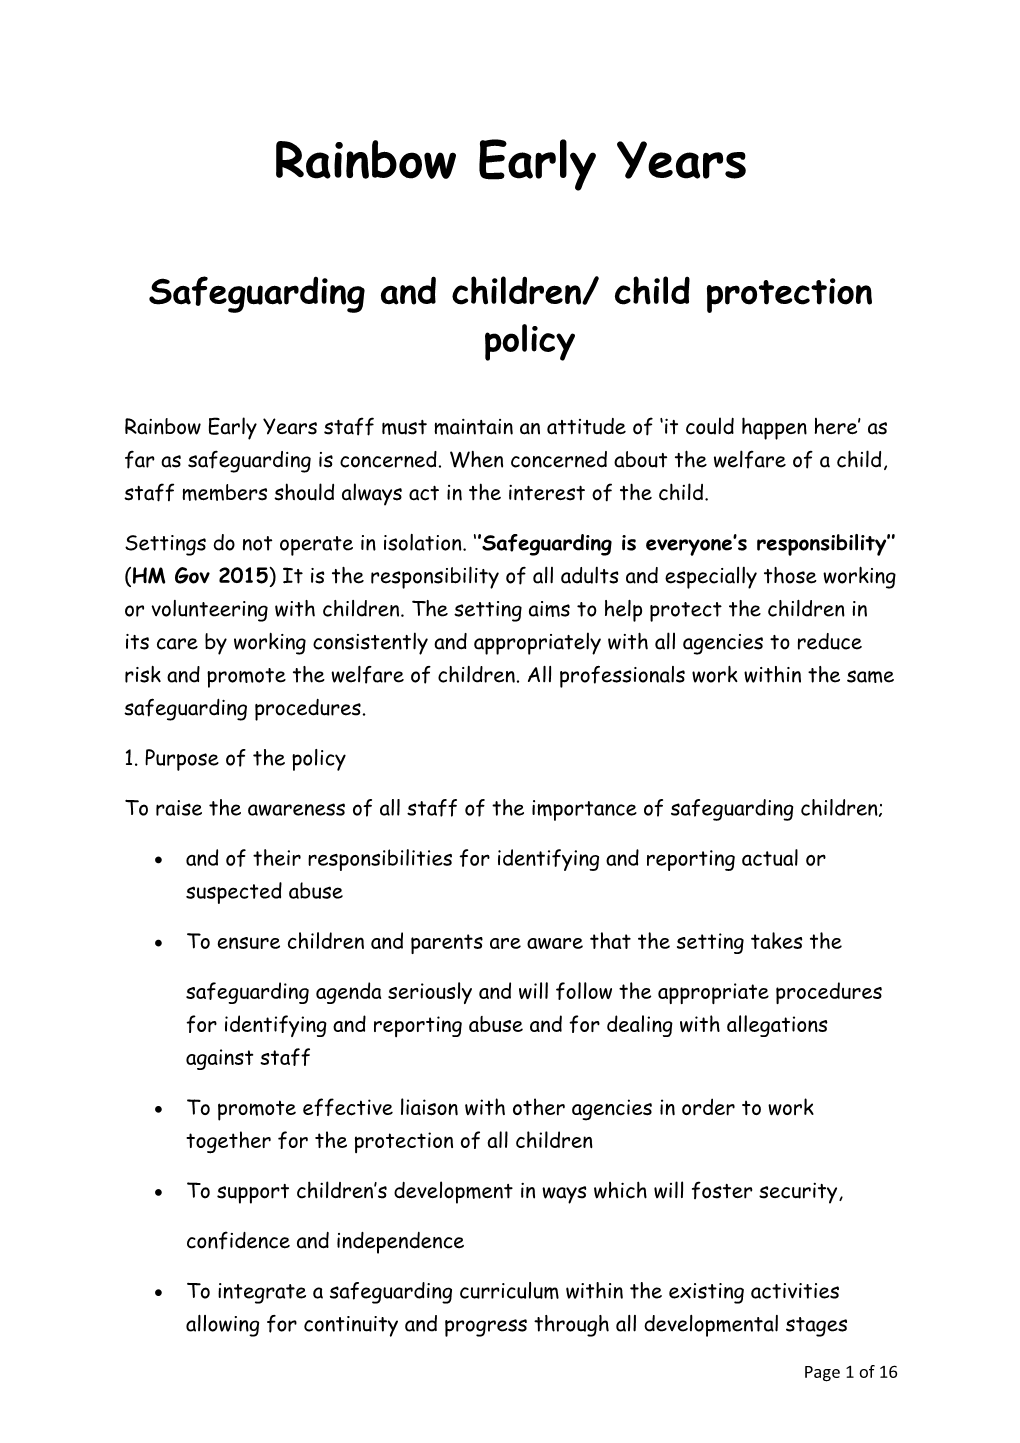 Safeguarding and Children/ Child Protection Policy